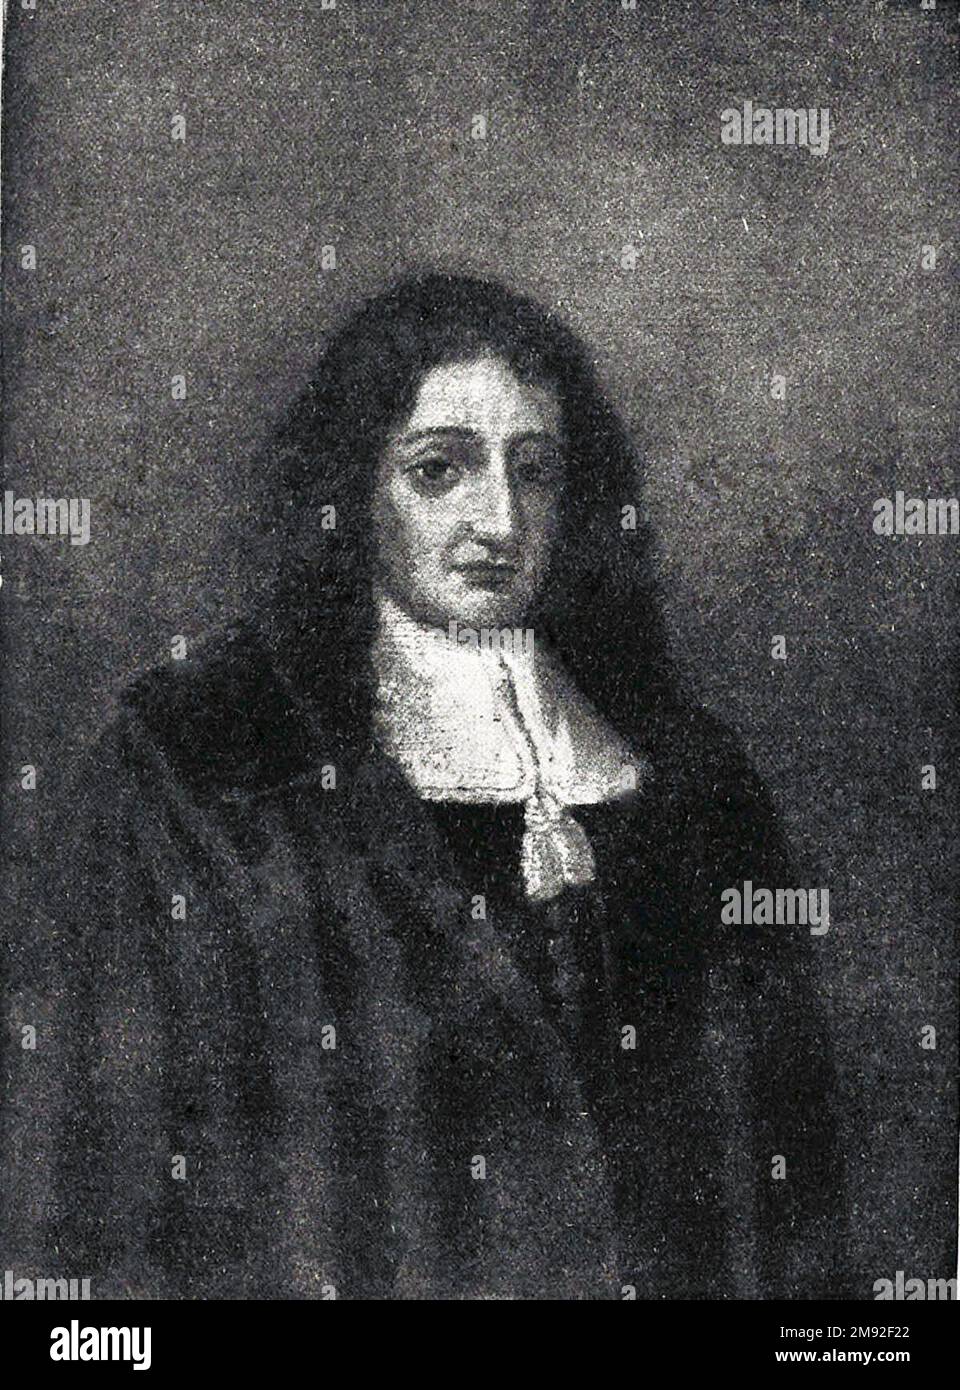 Illustration from the Jewish Encyclopedia of Brockhaus and Efron. Benedict Spinoza (born Baruch Spinoza, November 24, 1632, Amsterdam - February 21, 1677, The Hague) - Dutch rationalist philosopher, naturalist, one of the main representatives of the philosophy of the New Age ca.  before 1906 Stock Photo